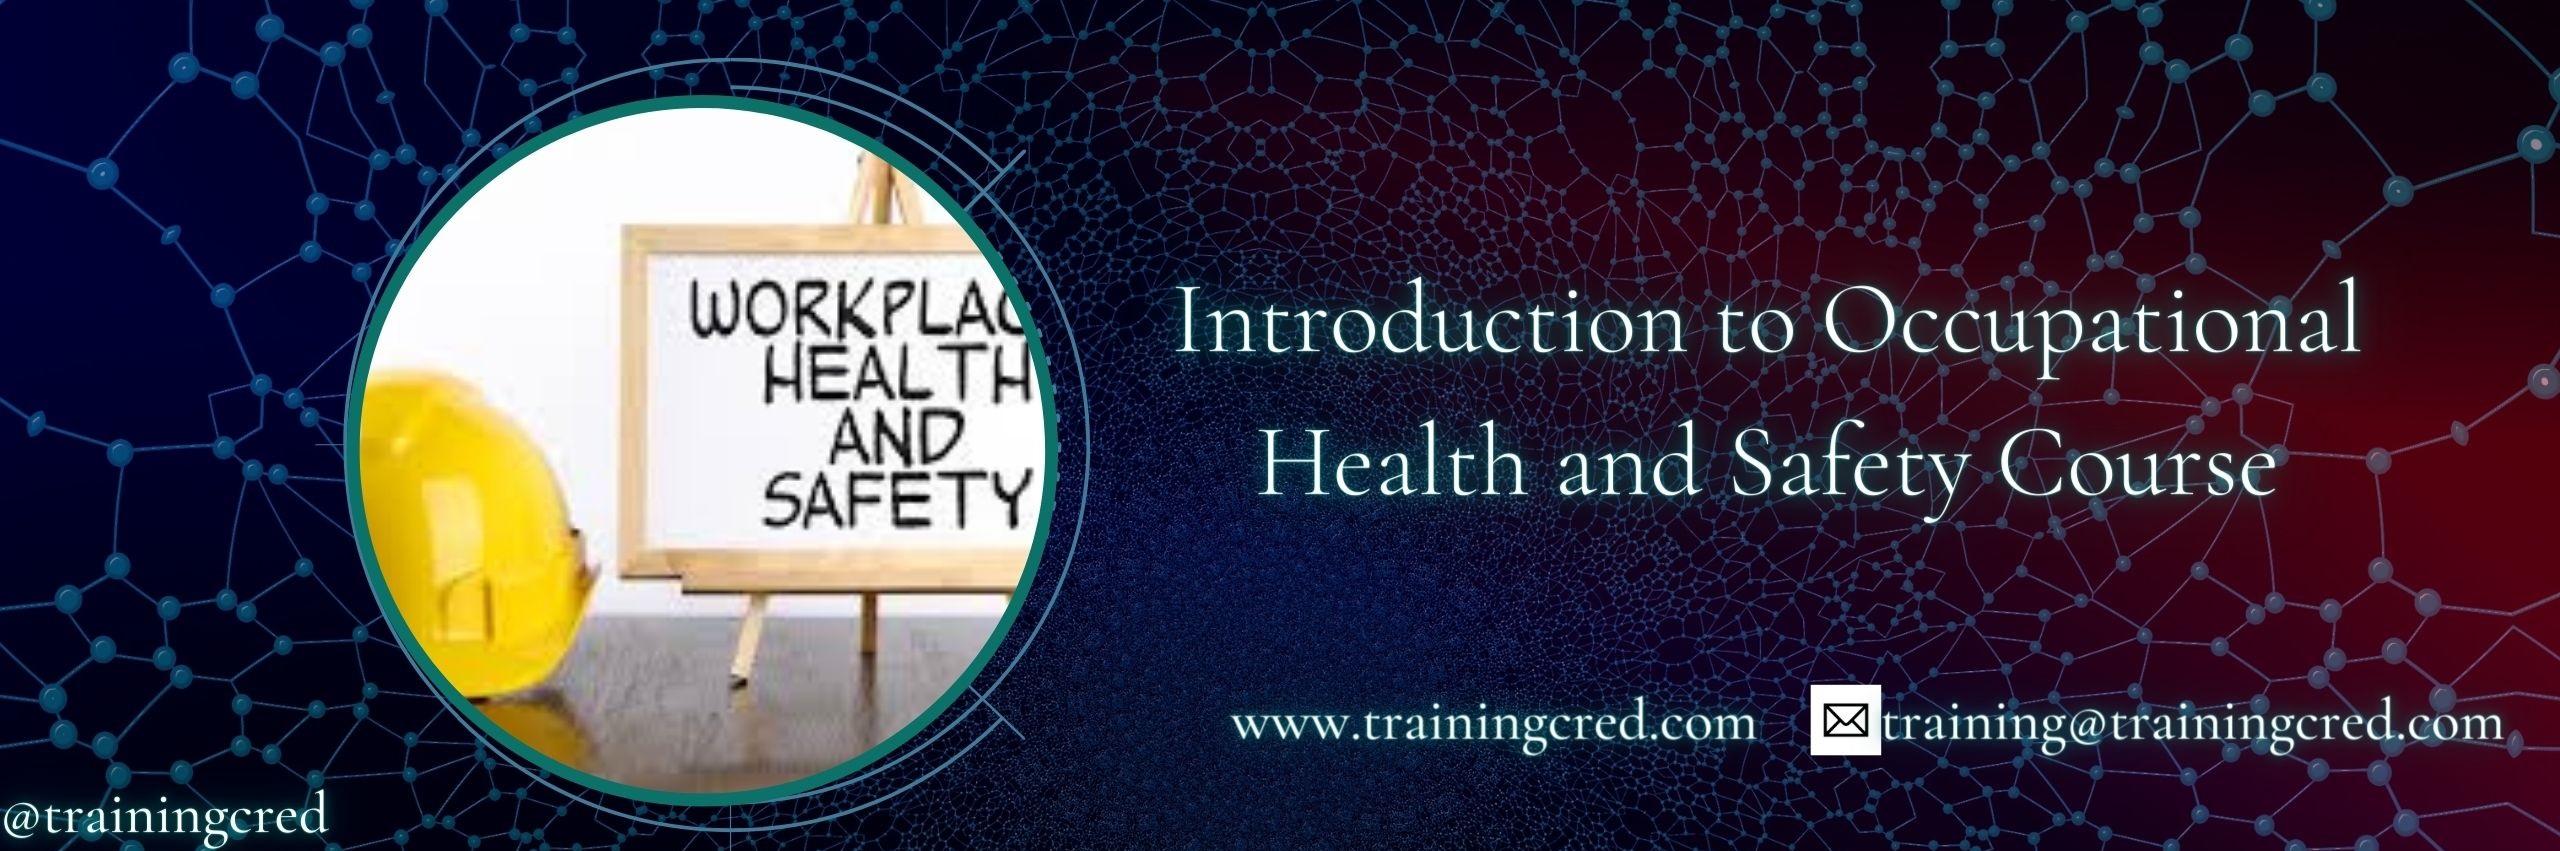 Introduction to Occupational Health and Safety Training